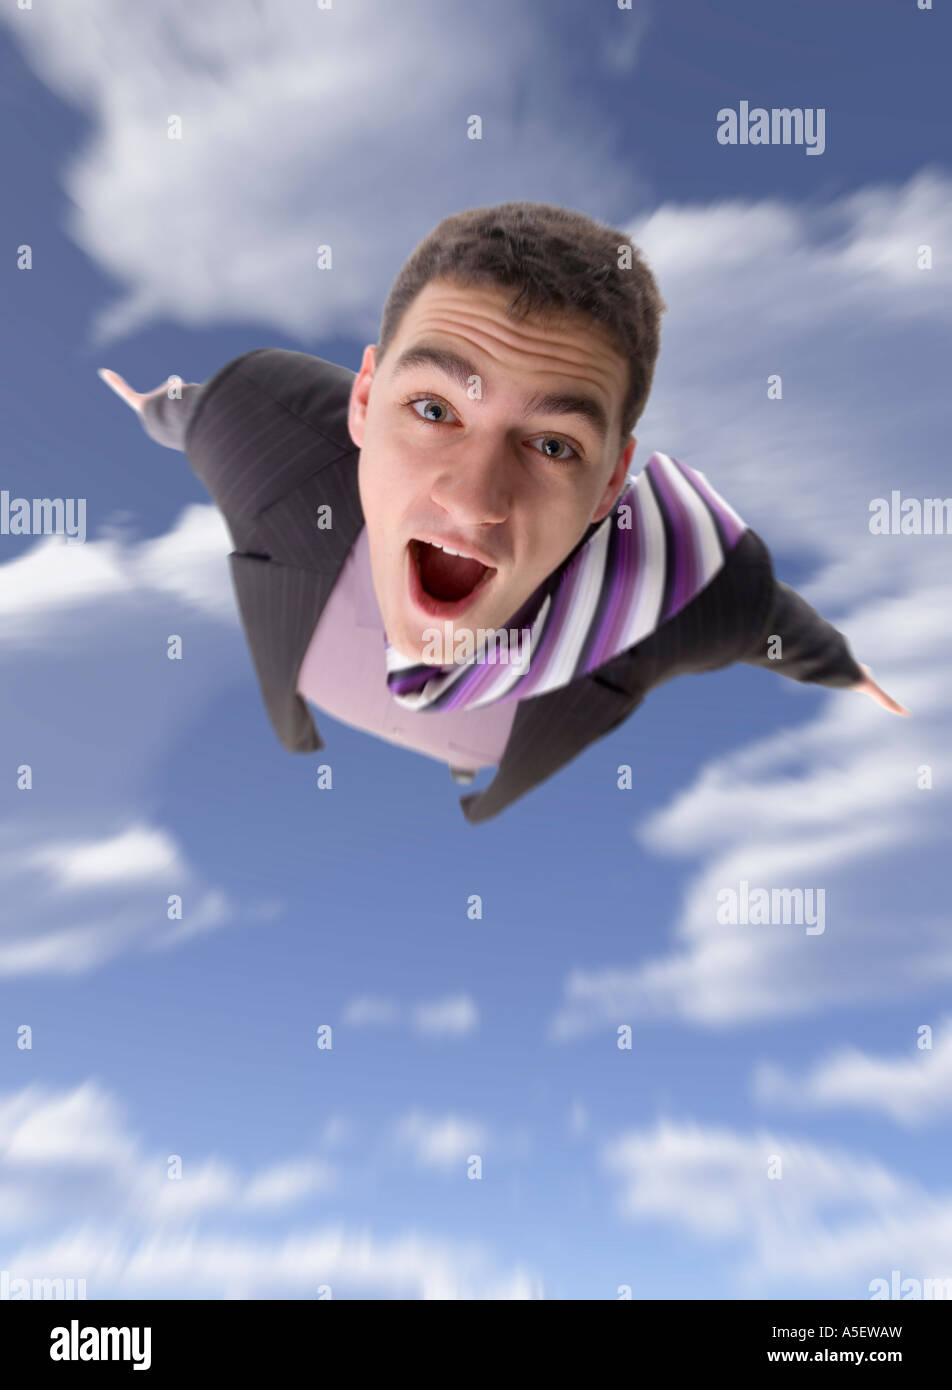 Man s body moving toward on the blue cloudy sky Focus on the eyes the rest blured Stock Photo